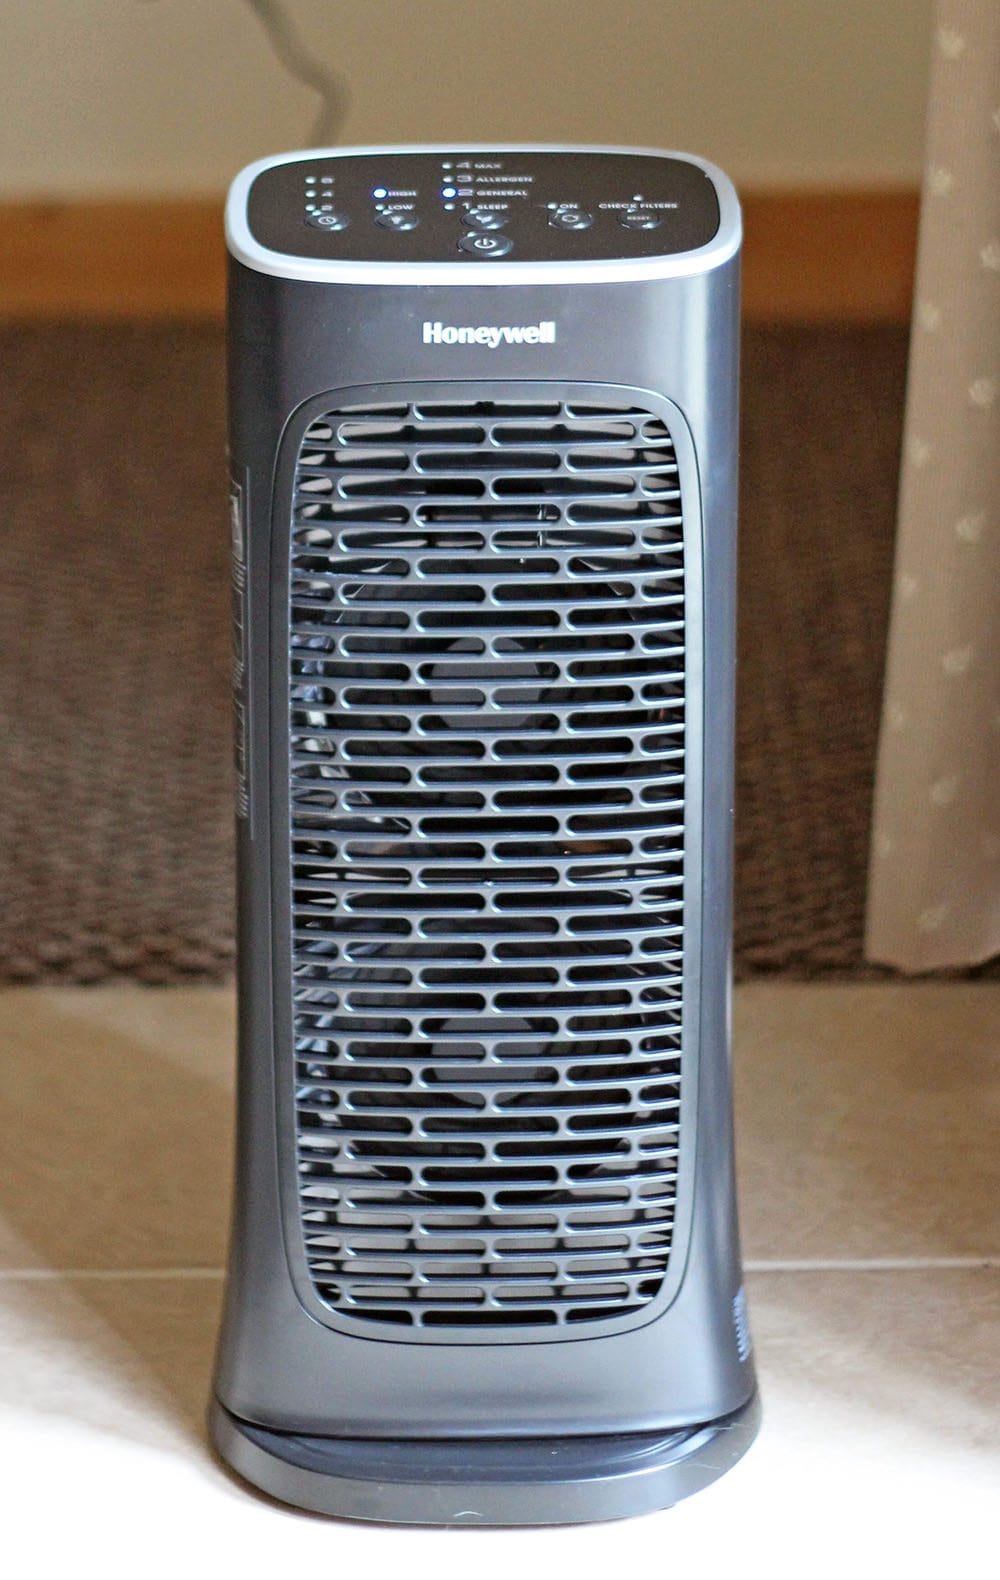 A Honeywell Air Cleaner sitting on tile. 